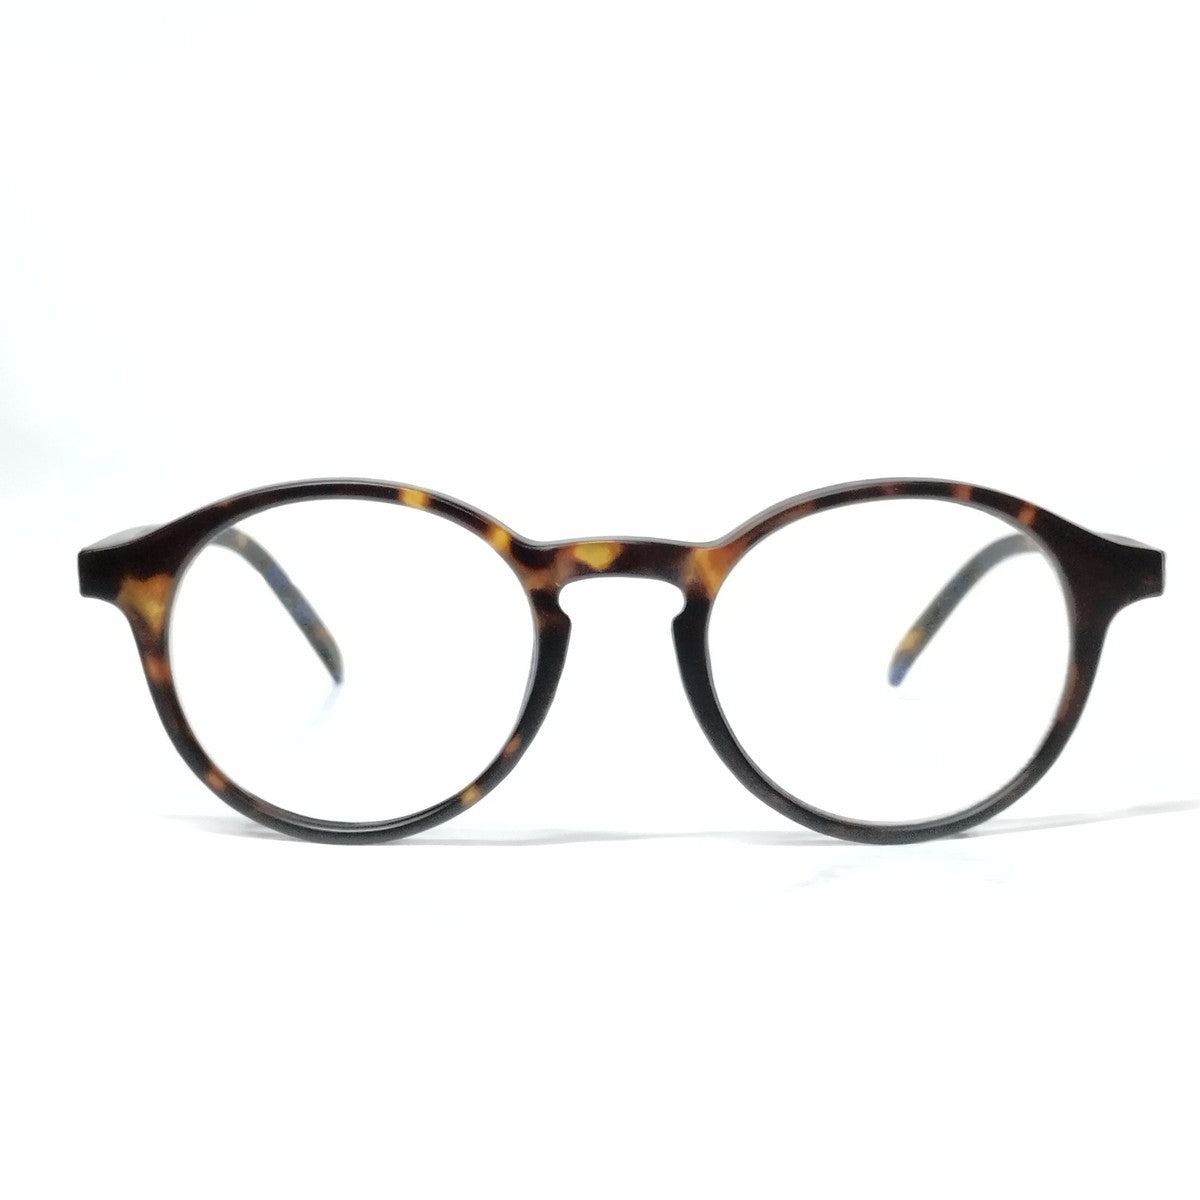 DA Small Round Progressive Spectacles for Computers Multifocal Reading Glasses for Men Women